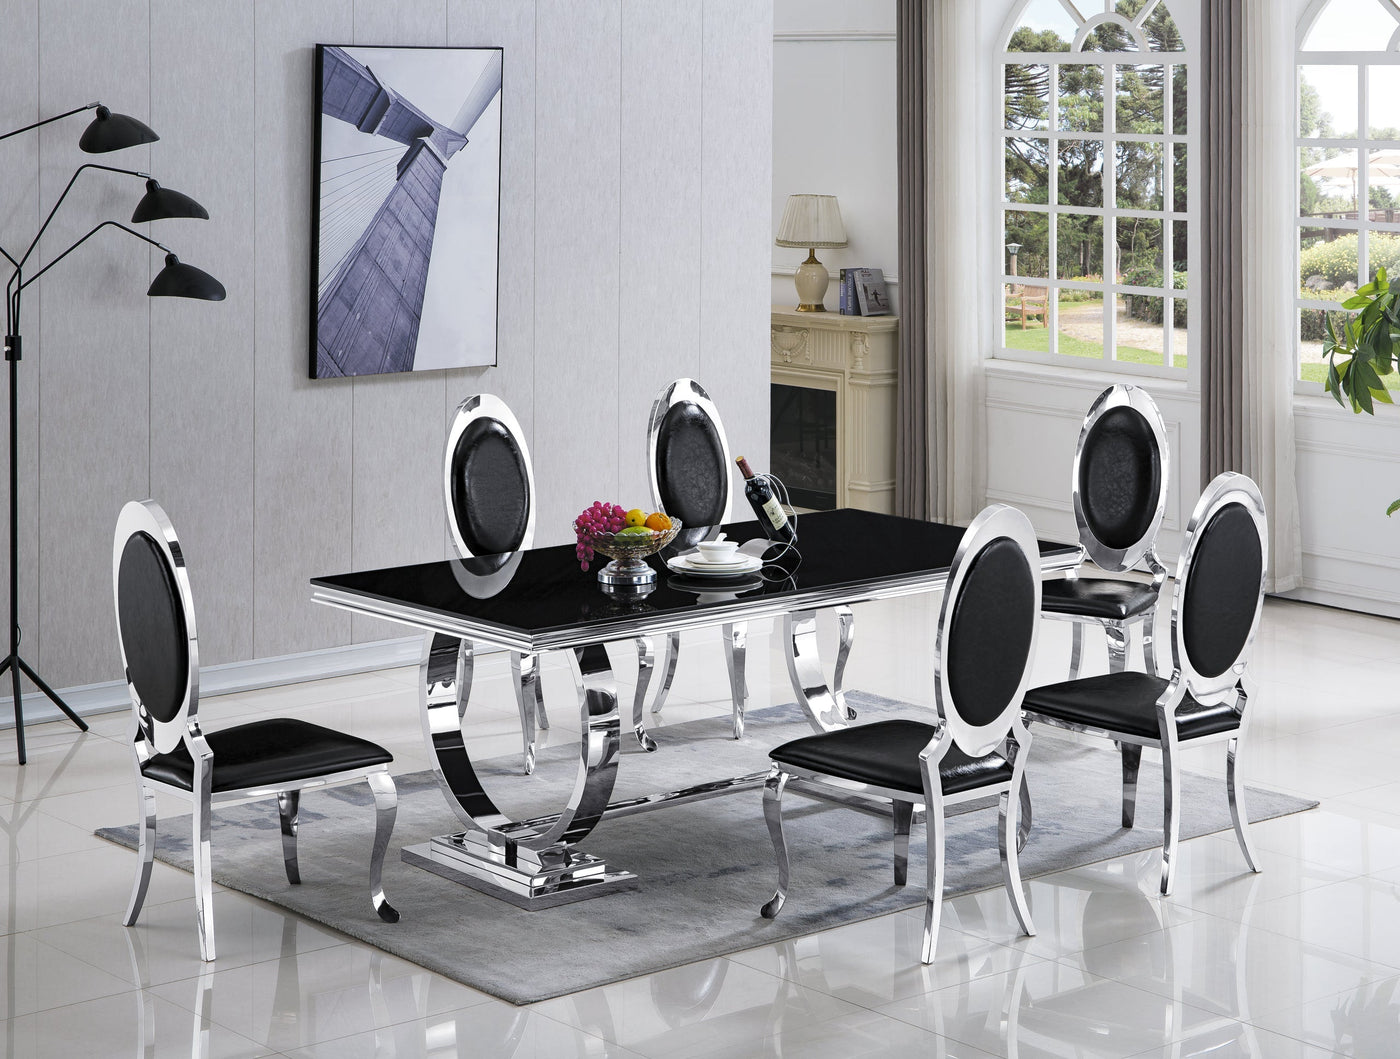 D2022 - Dining Table + 6 Chair Set